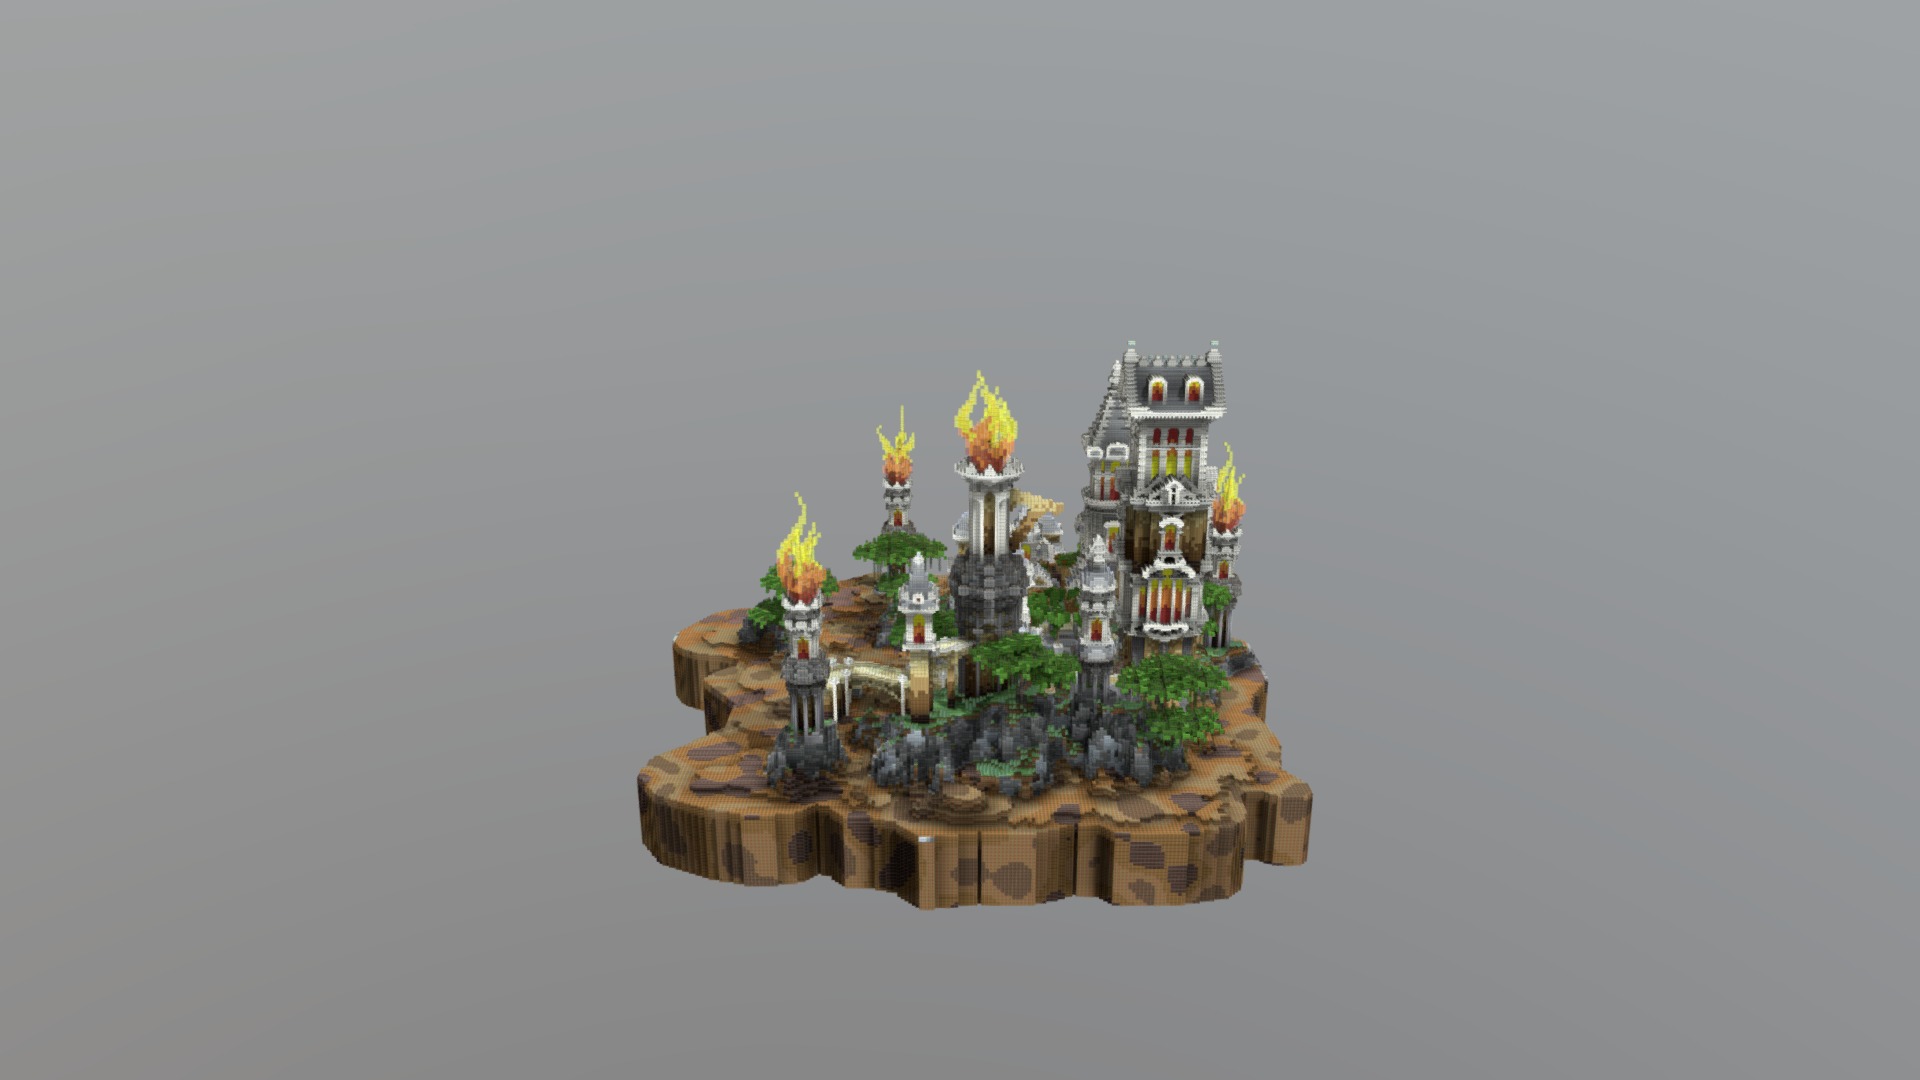 3D model Torchlight – Hub / Spawn - This is a 3D model of the Torchlight - Hub / Spawn. The 3D model is about a toy house made of building blocks.